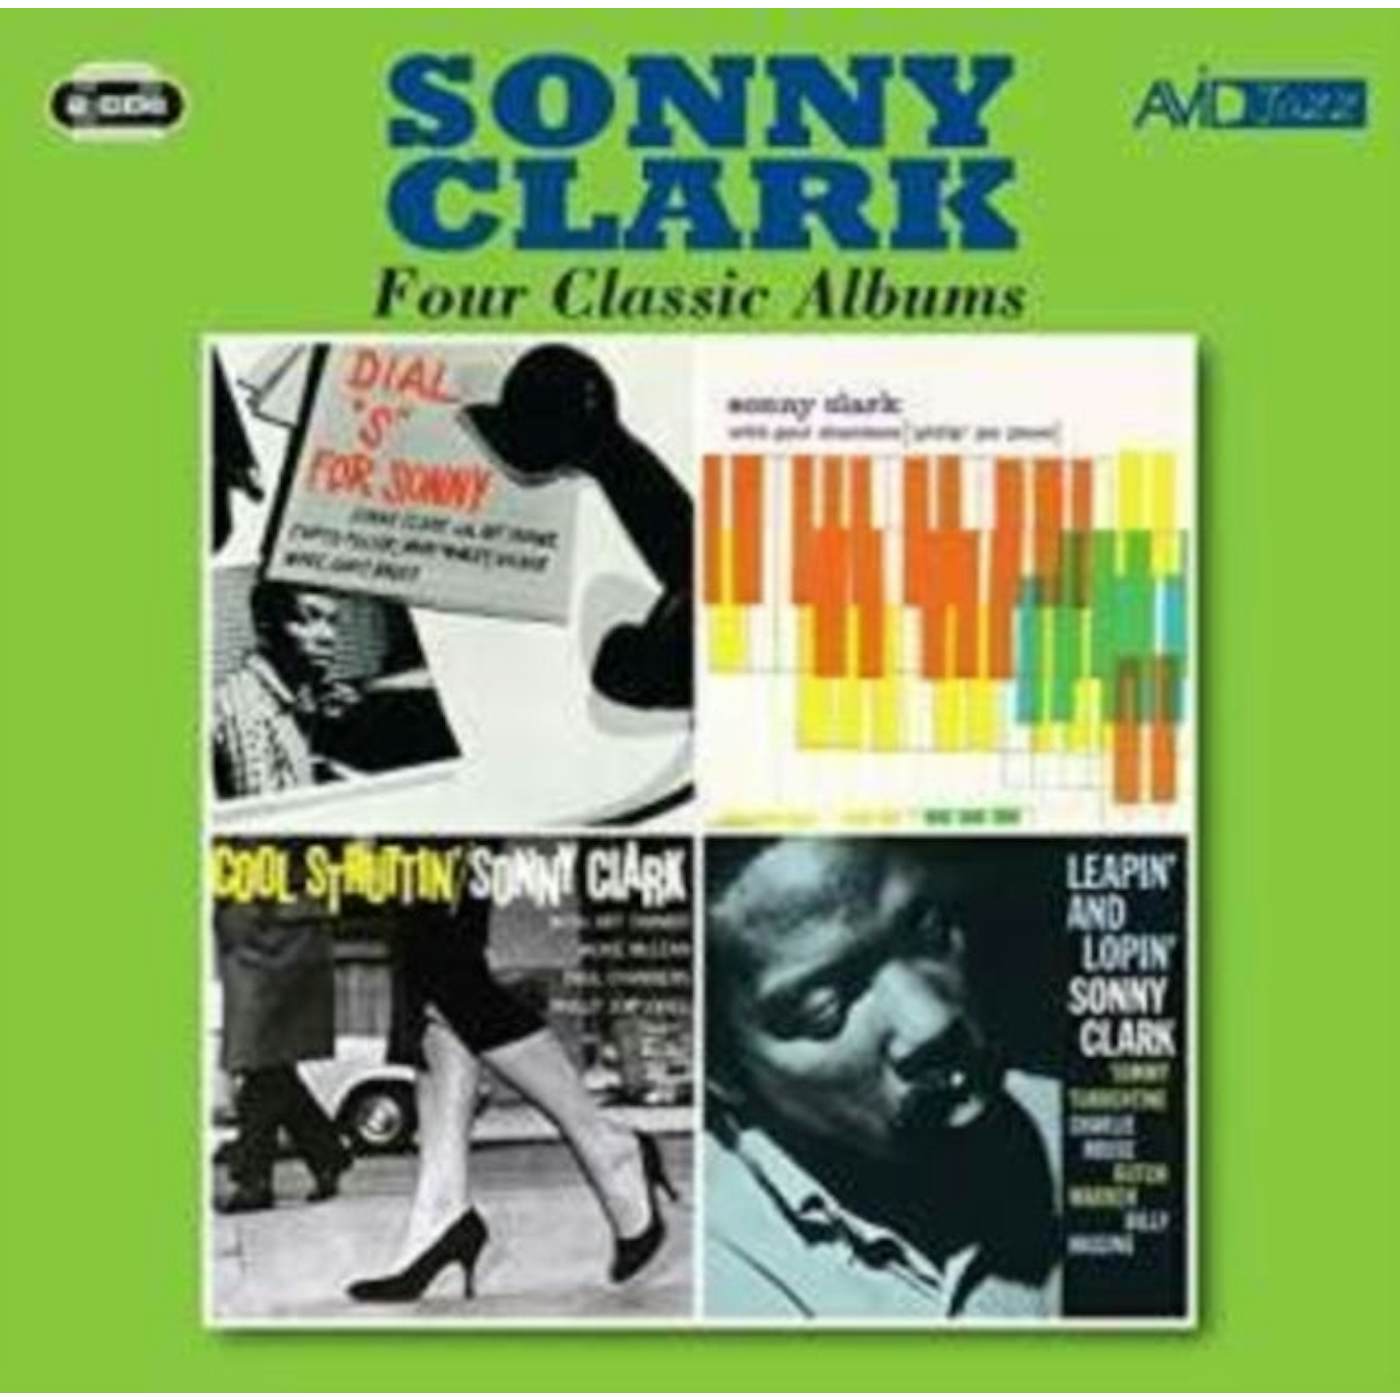 Sonny Clark CD - Four Classic Albums (Dial 'S' For Sonny / Sonny Clark Trio / Cool Struttin' / Leapin' And Lopin')